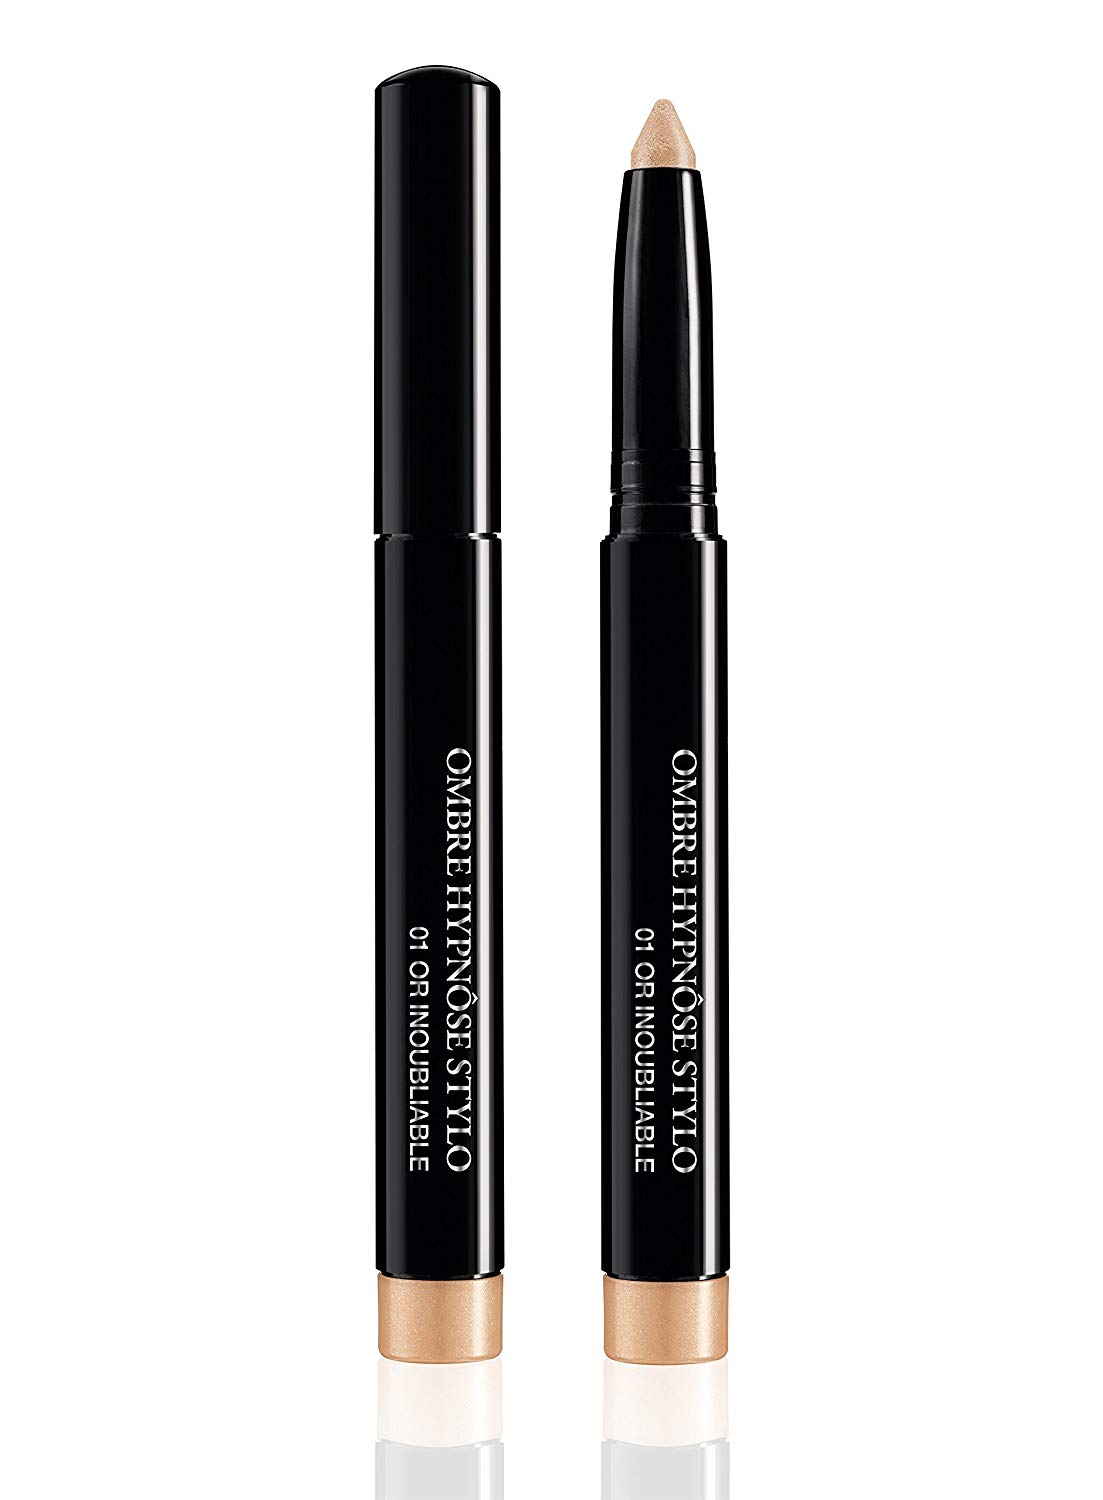 Lancome Ombre Hypnose Stylo Unisex Long Lasting Cream Eyeshadow Pencil, Colour: 03 Taupe Quartz and each earring weighs 1.4 g 10 g Pack of 1), ‎03 taupe